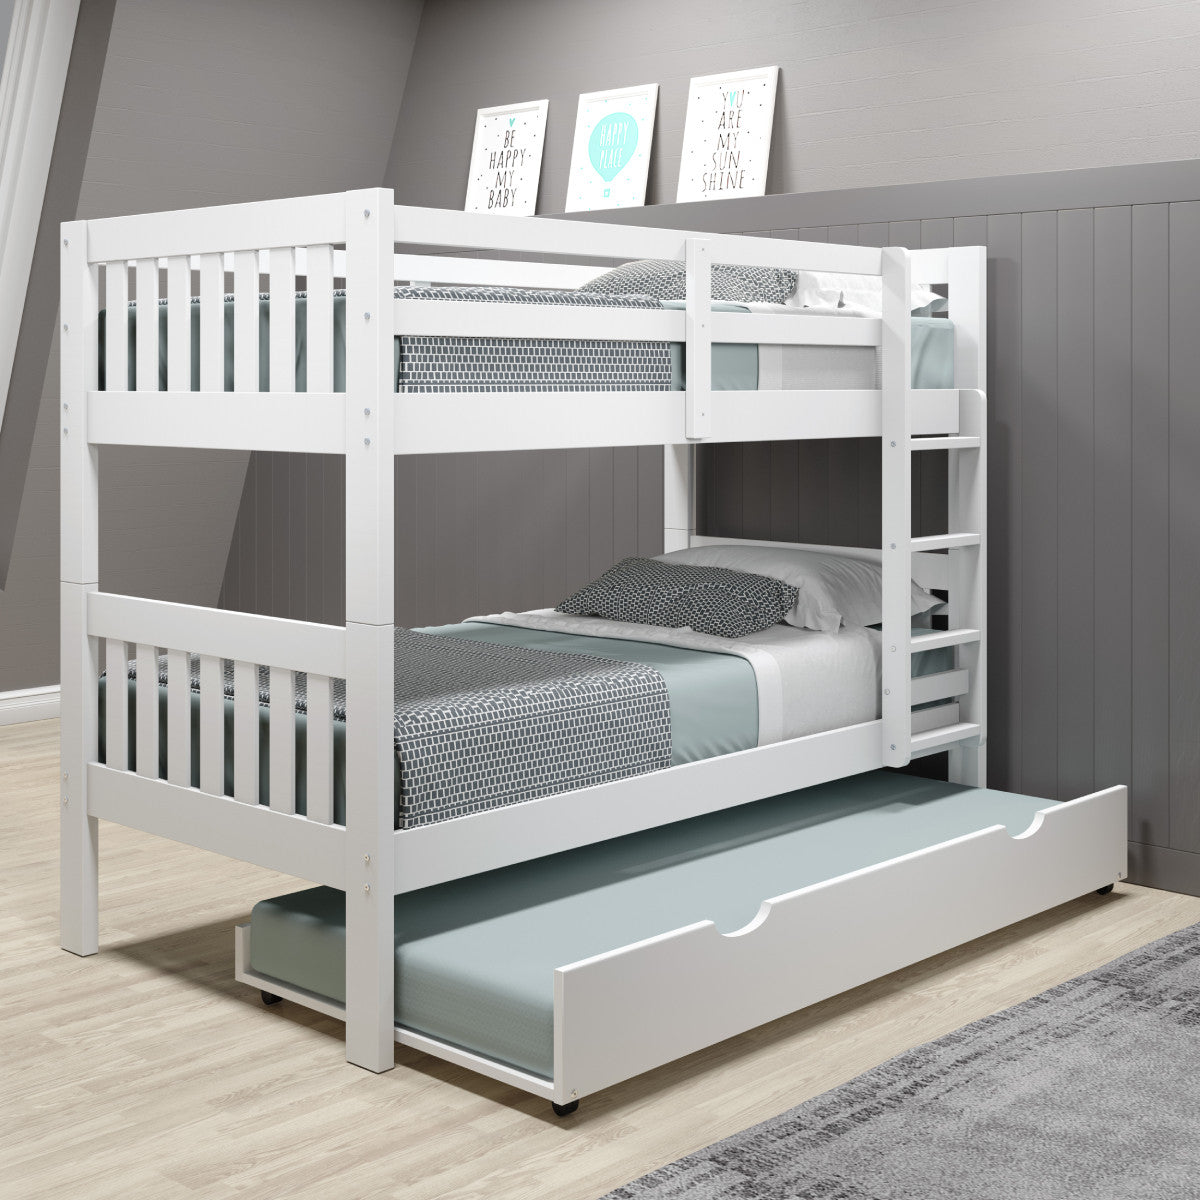 TWIN/TWIN MISSION BUNK BED W/TWIN TRUNDLE BED IN WHITE FINISH